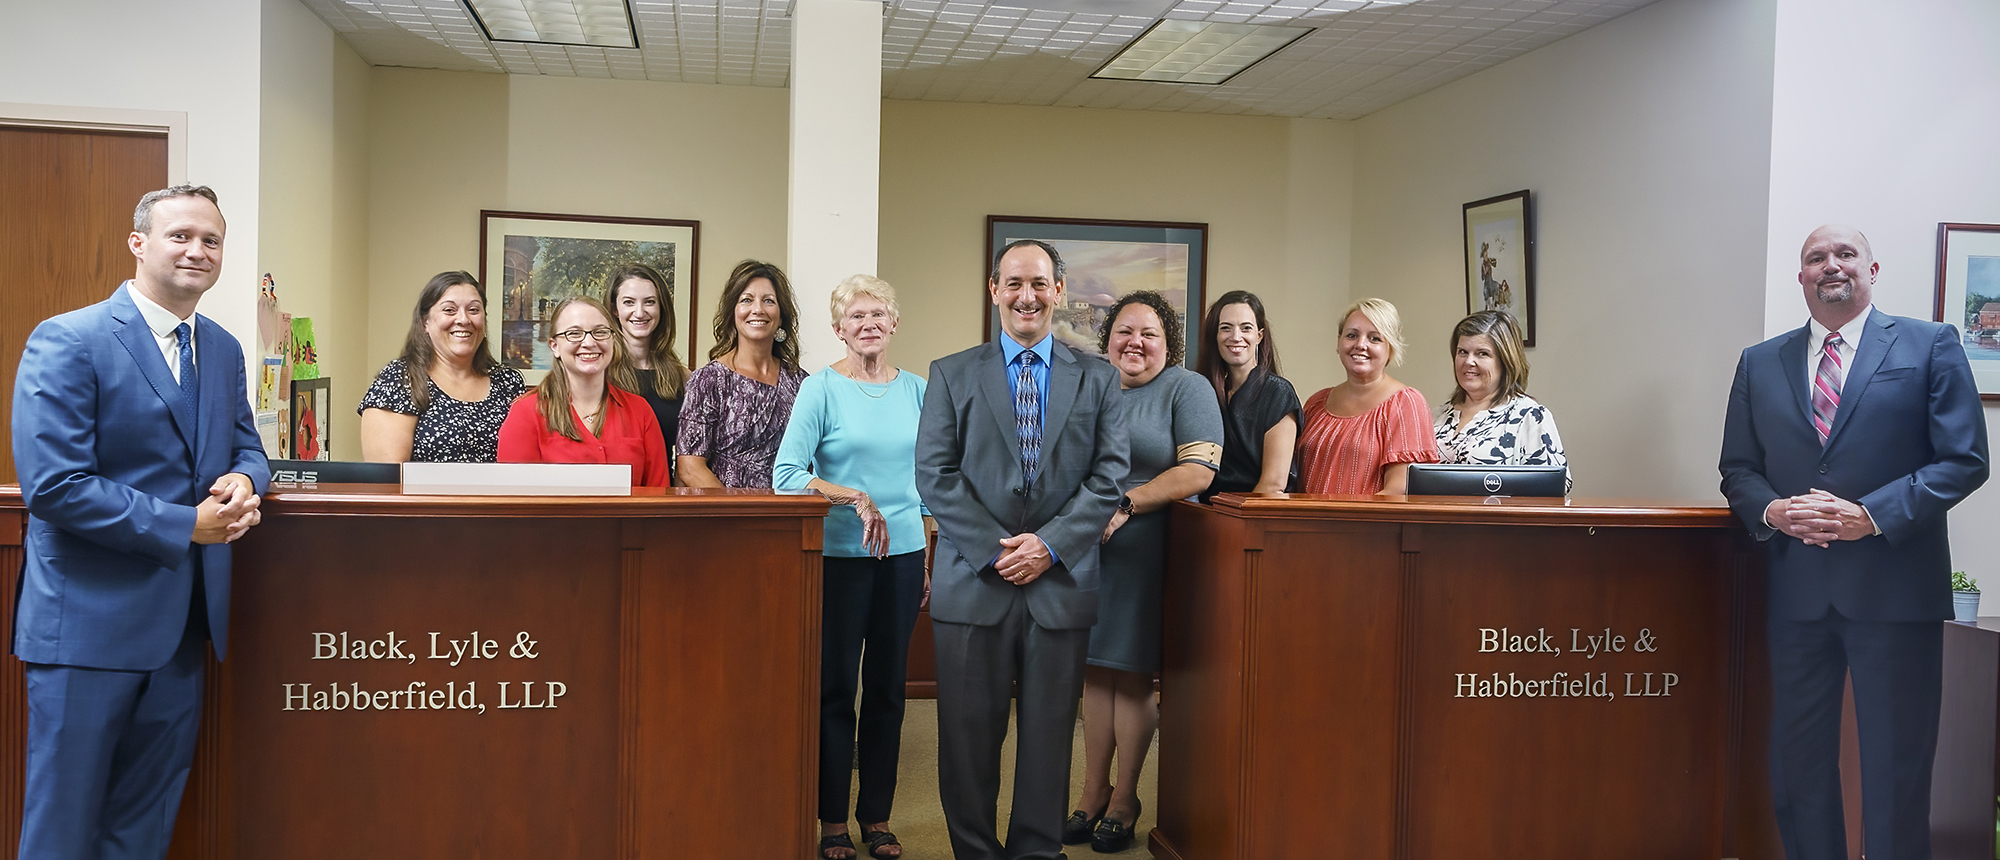 Photo of Professionals at Black, Lyle & Habberfield, LLP